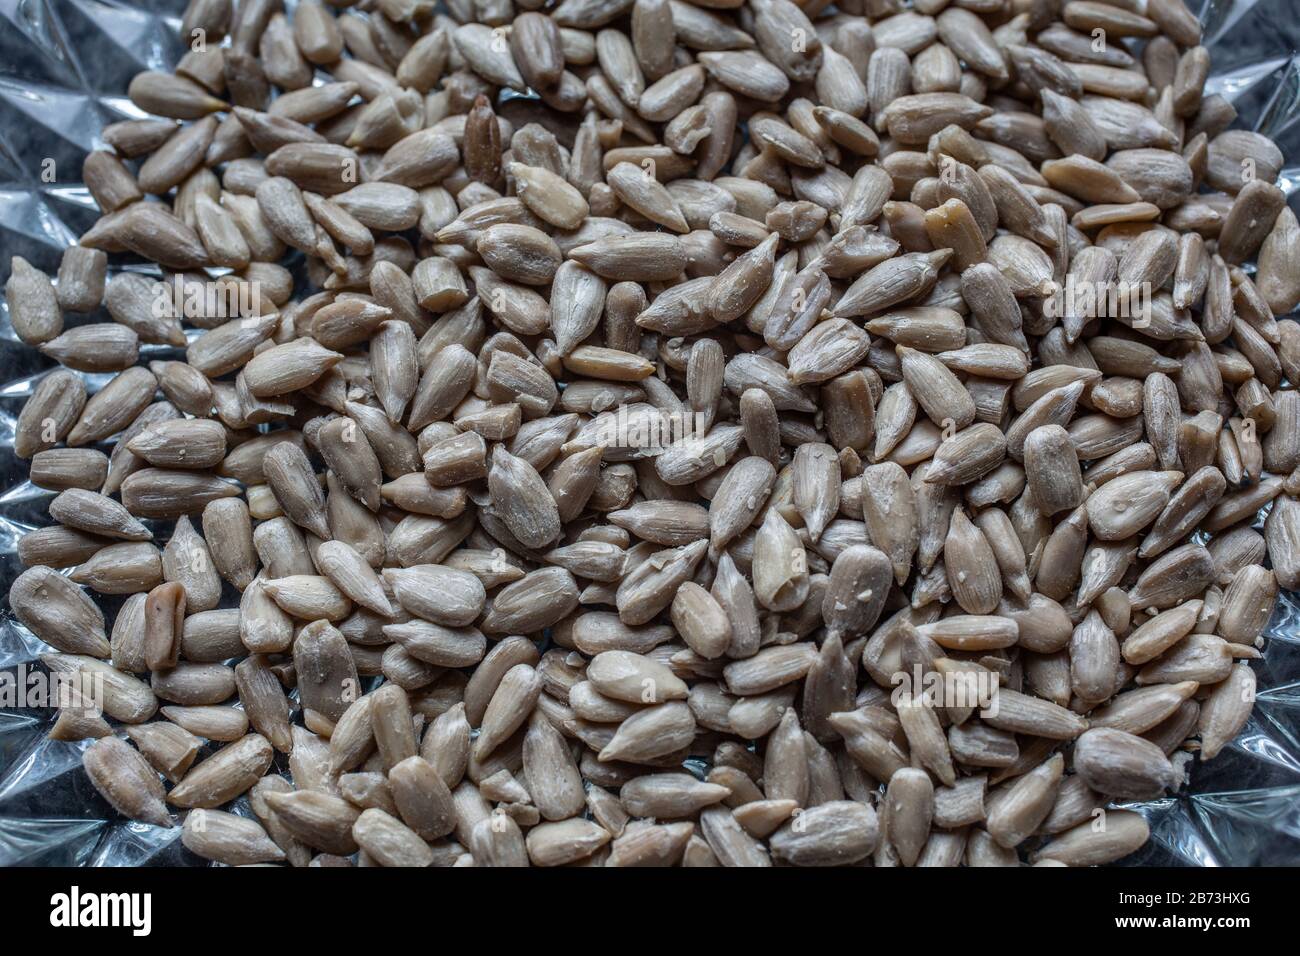 A pile of sunflower seeds as bird feed Stock Photo